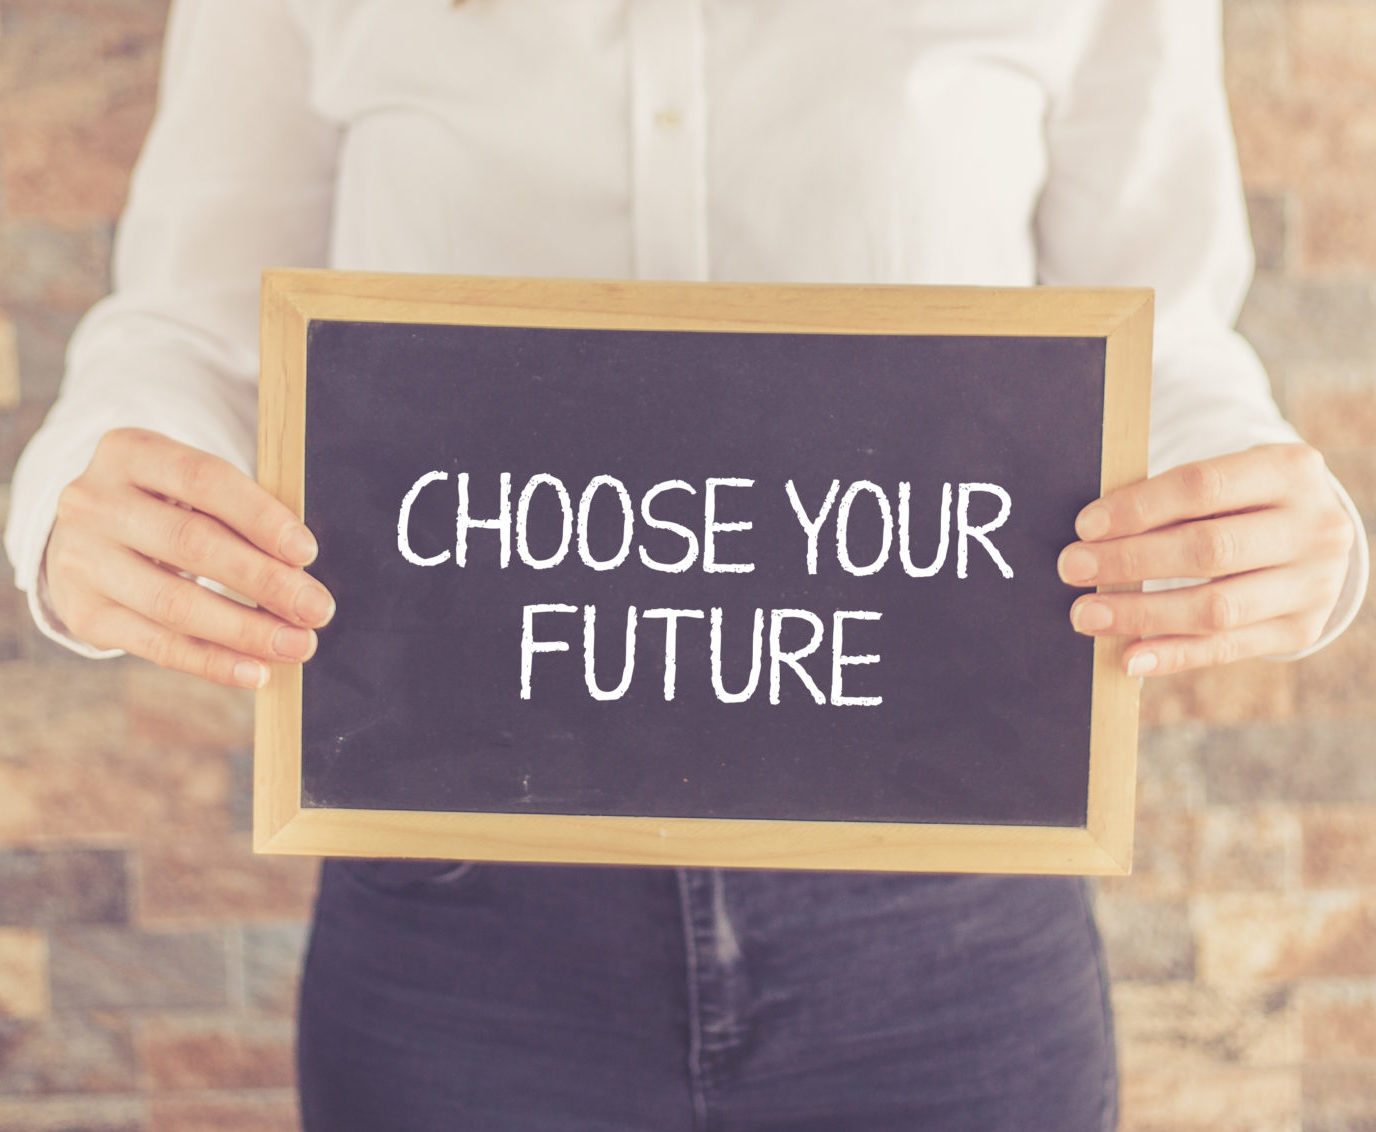 a person wearing a white shirt and dark pants holding a blackboard with the words "choose your future" written on them in front of a brick wall